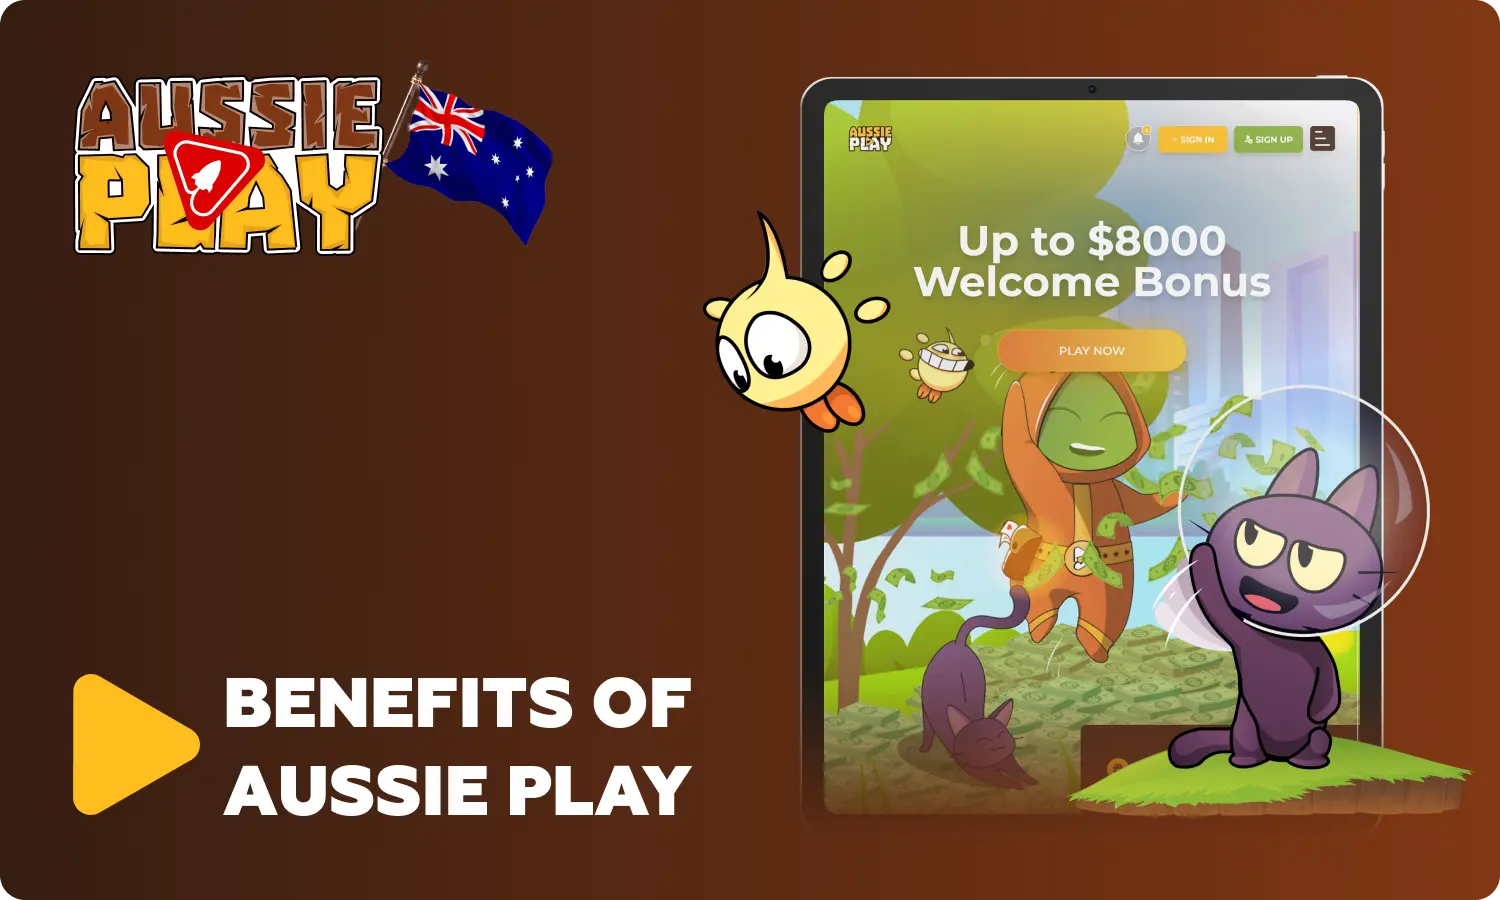 There are a number of benefits for players from Australia at Aussie Play